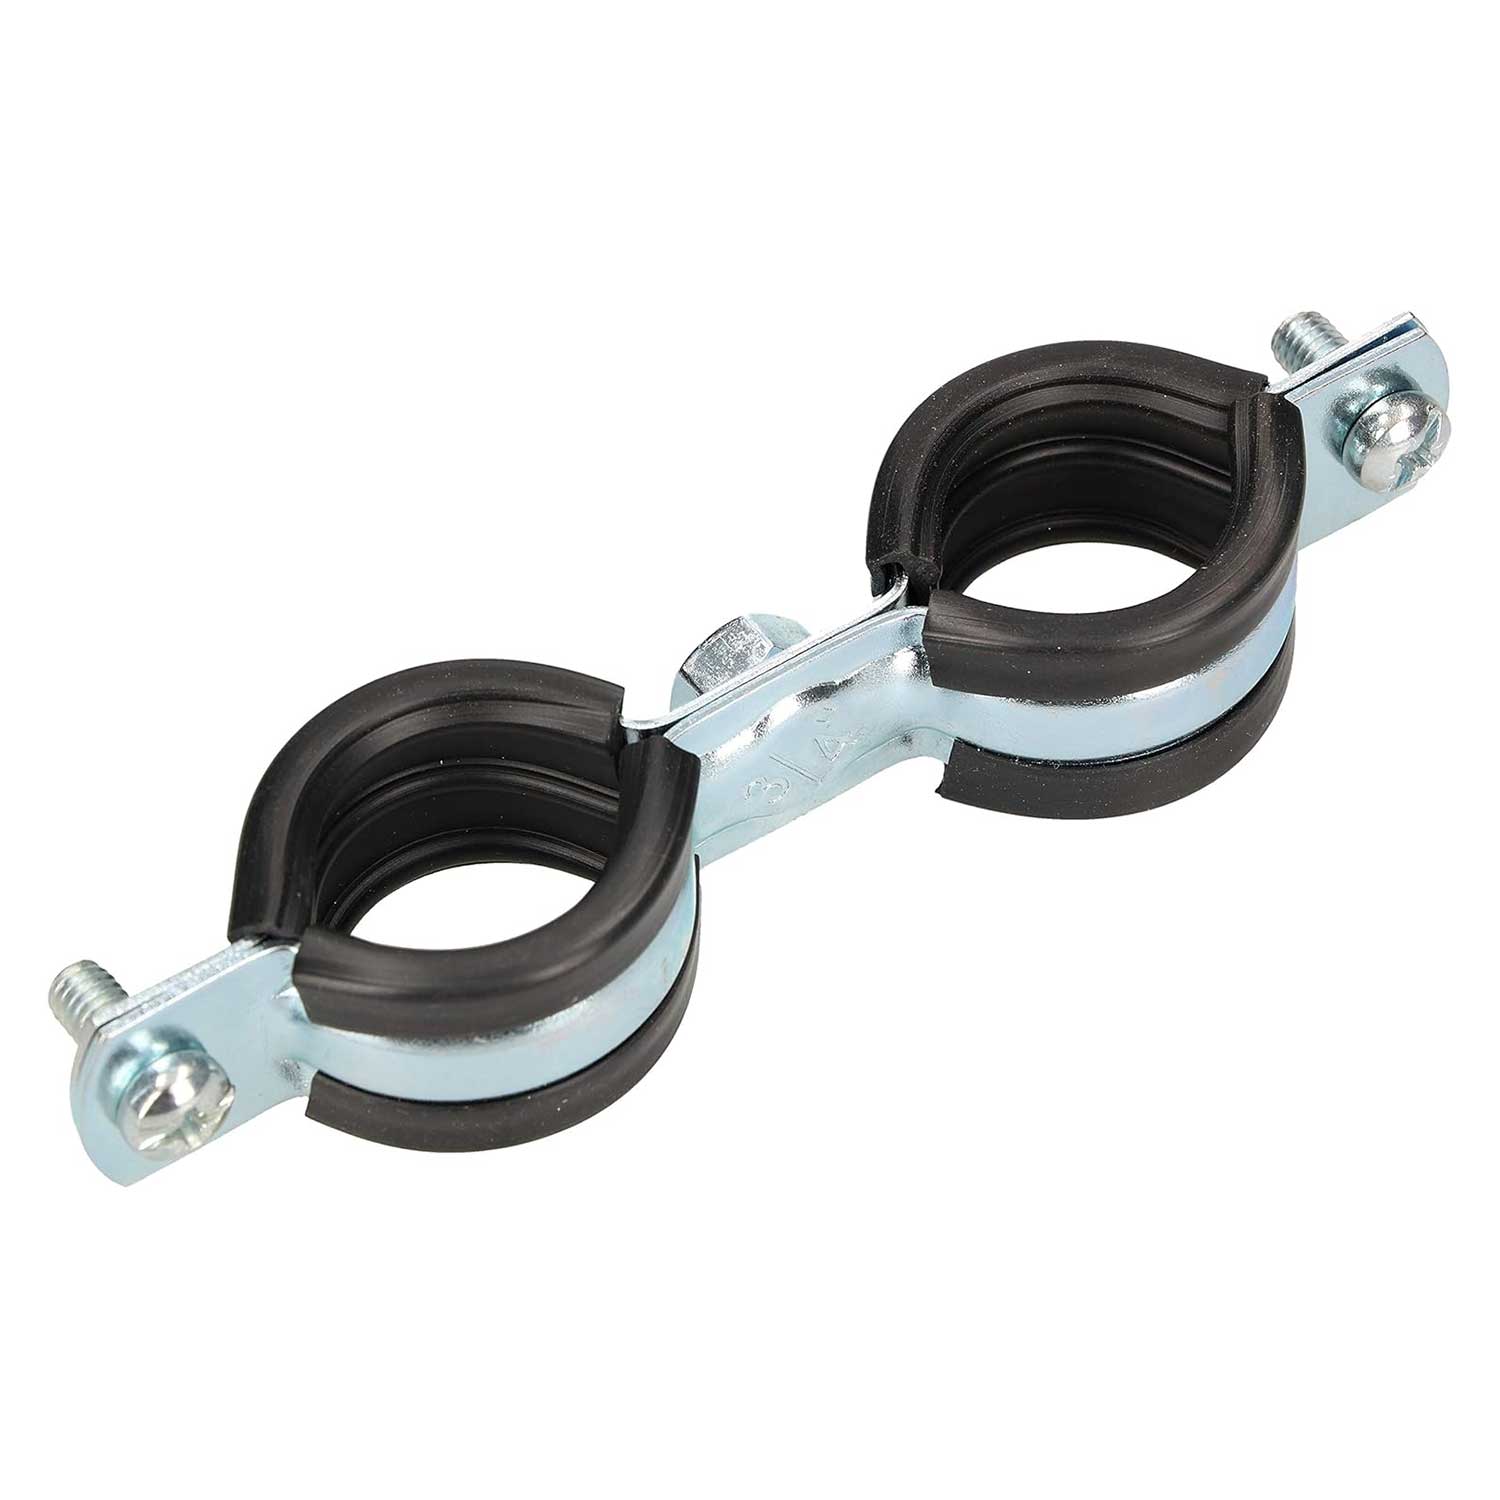 double wall pipe clamps with antivibration rubber